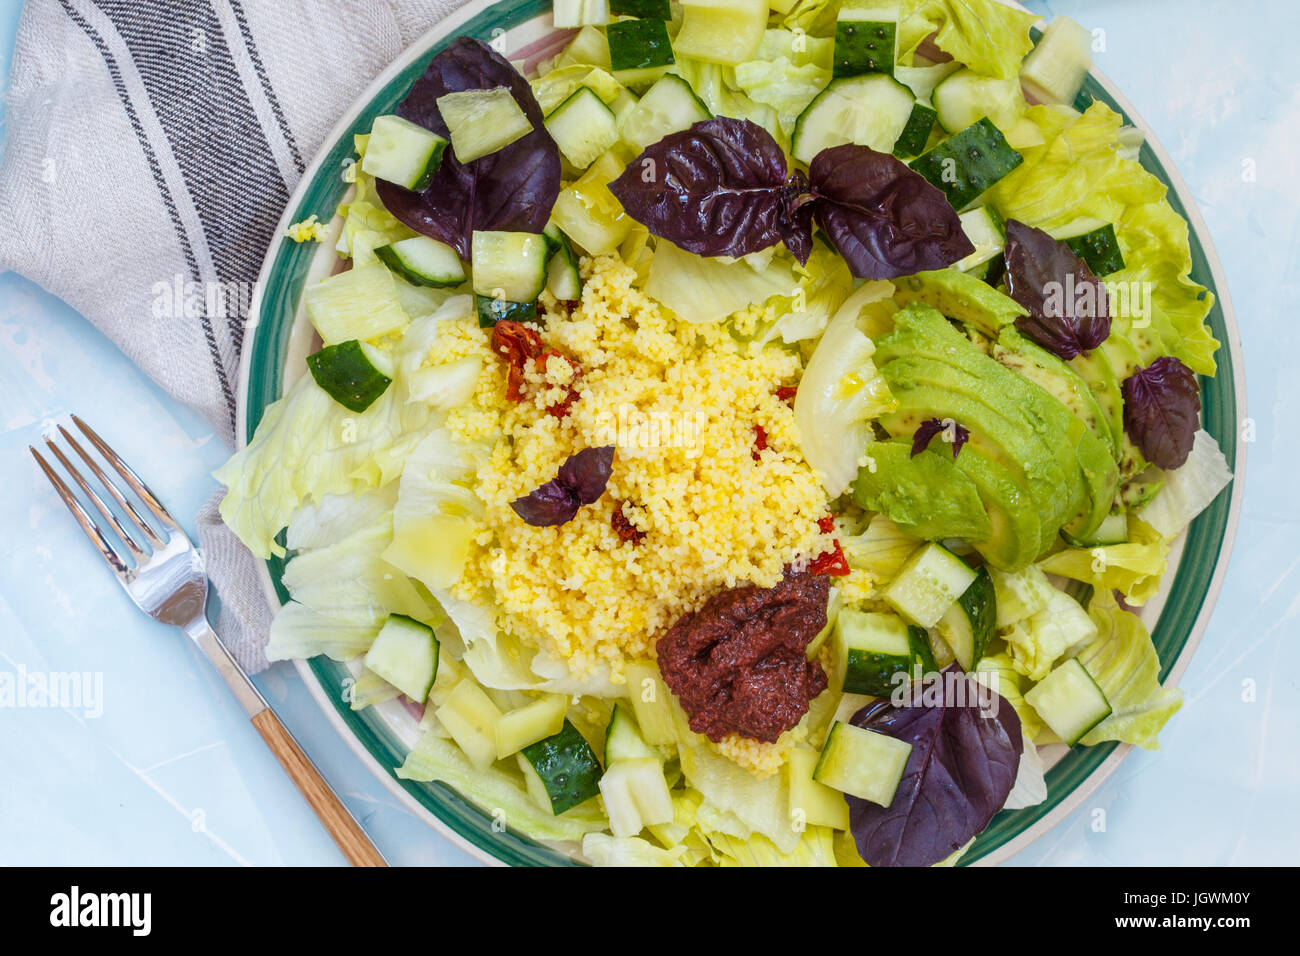 Vegetarian green salad with basil and couscous. Love for a healthy vegan food concept. Stock Photo